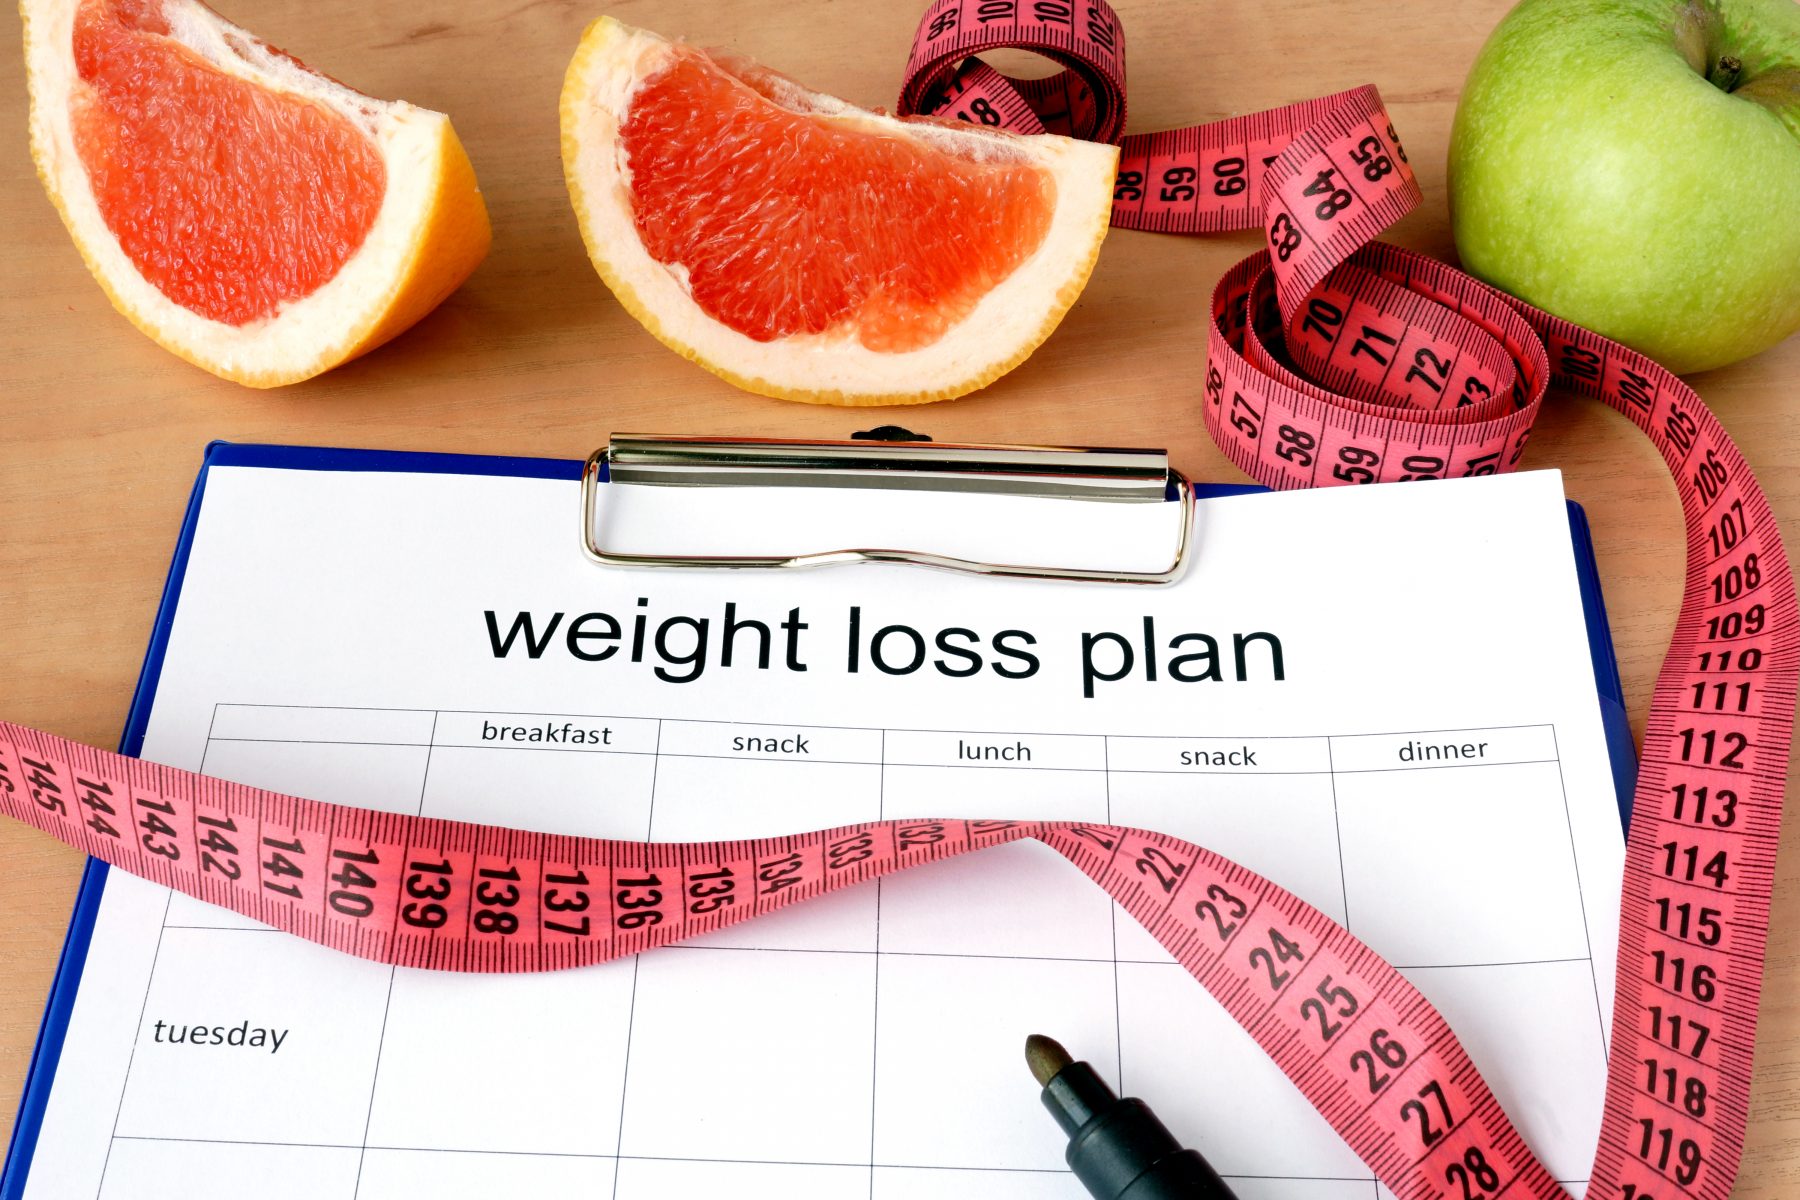 Weight loss plan calendar with fruit and measuring tape